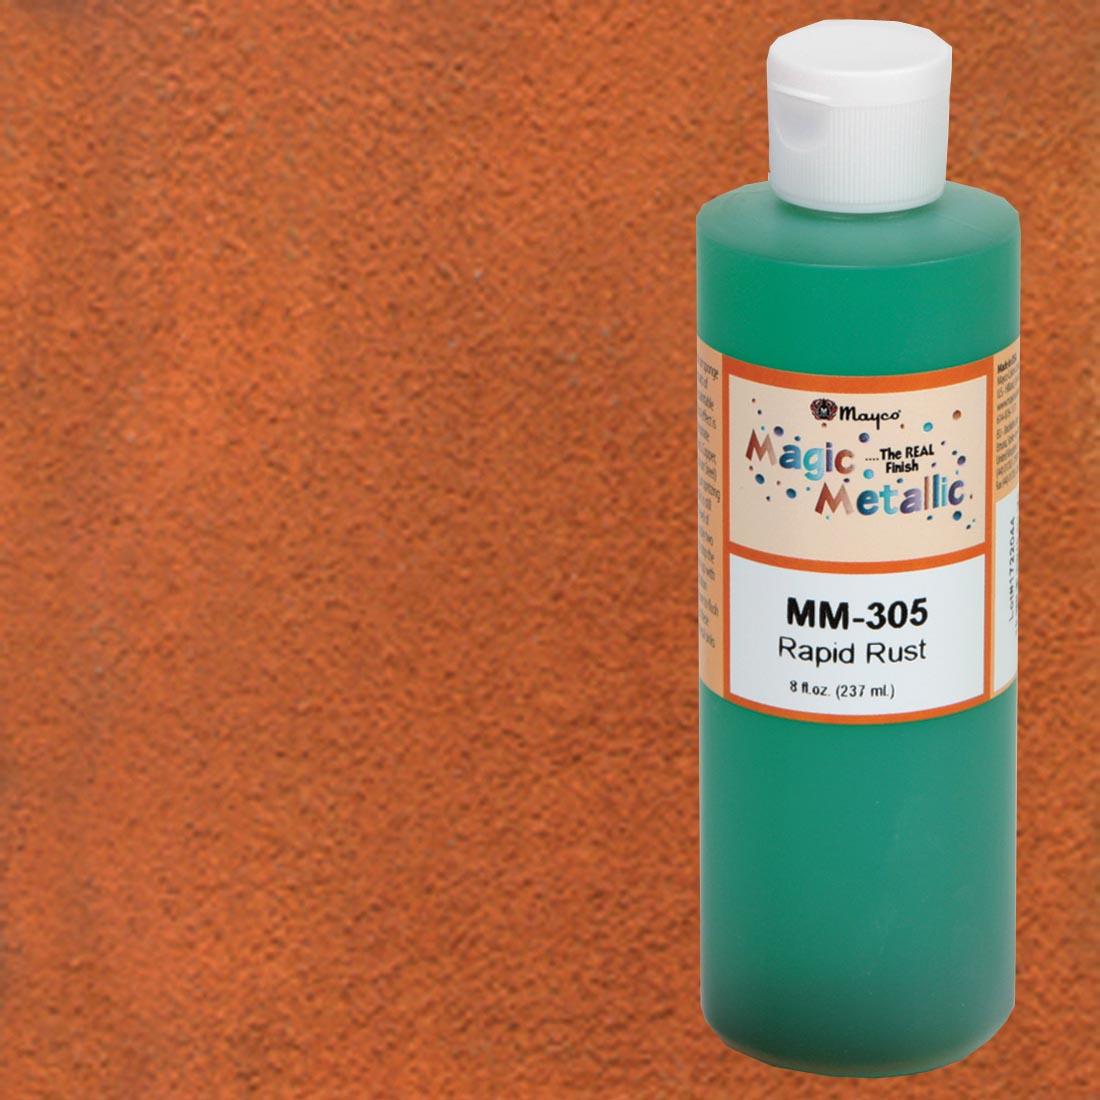 Bottle of Rapid Rust Magic Metallic Patina with a Sample Tile for the background